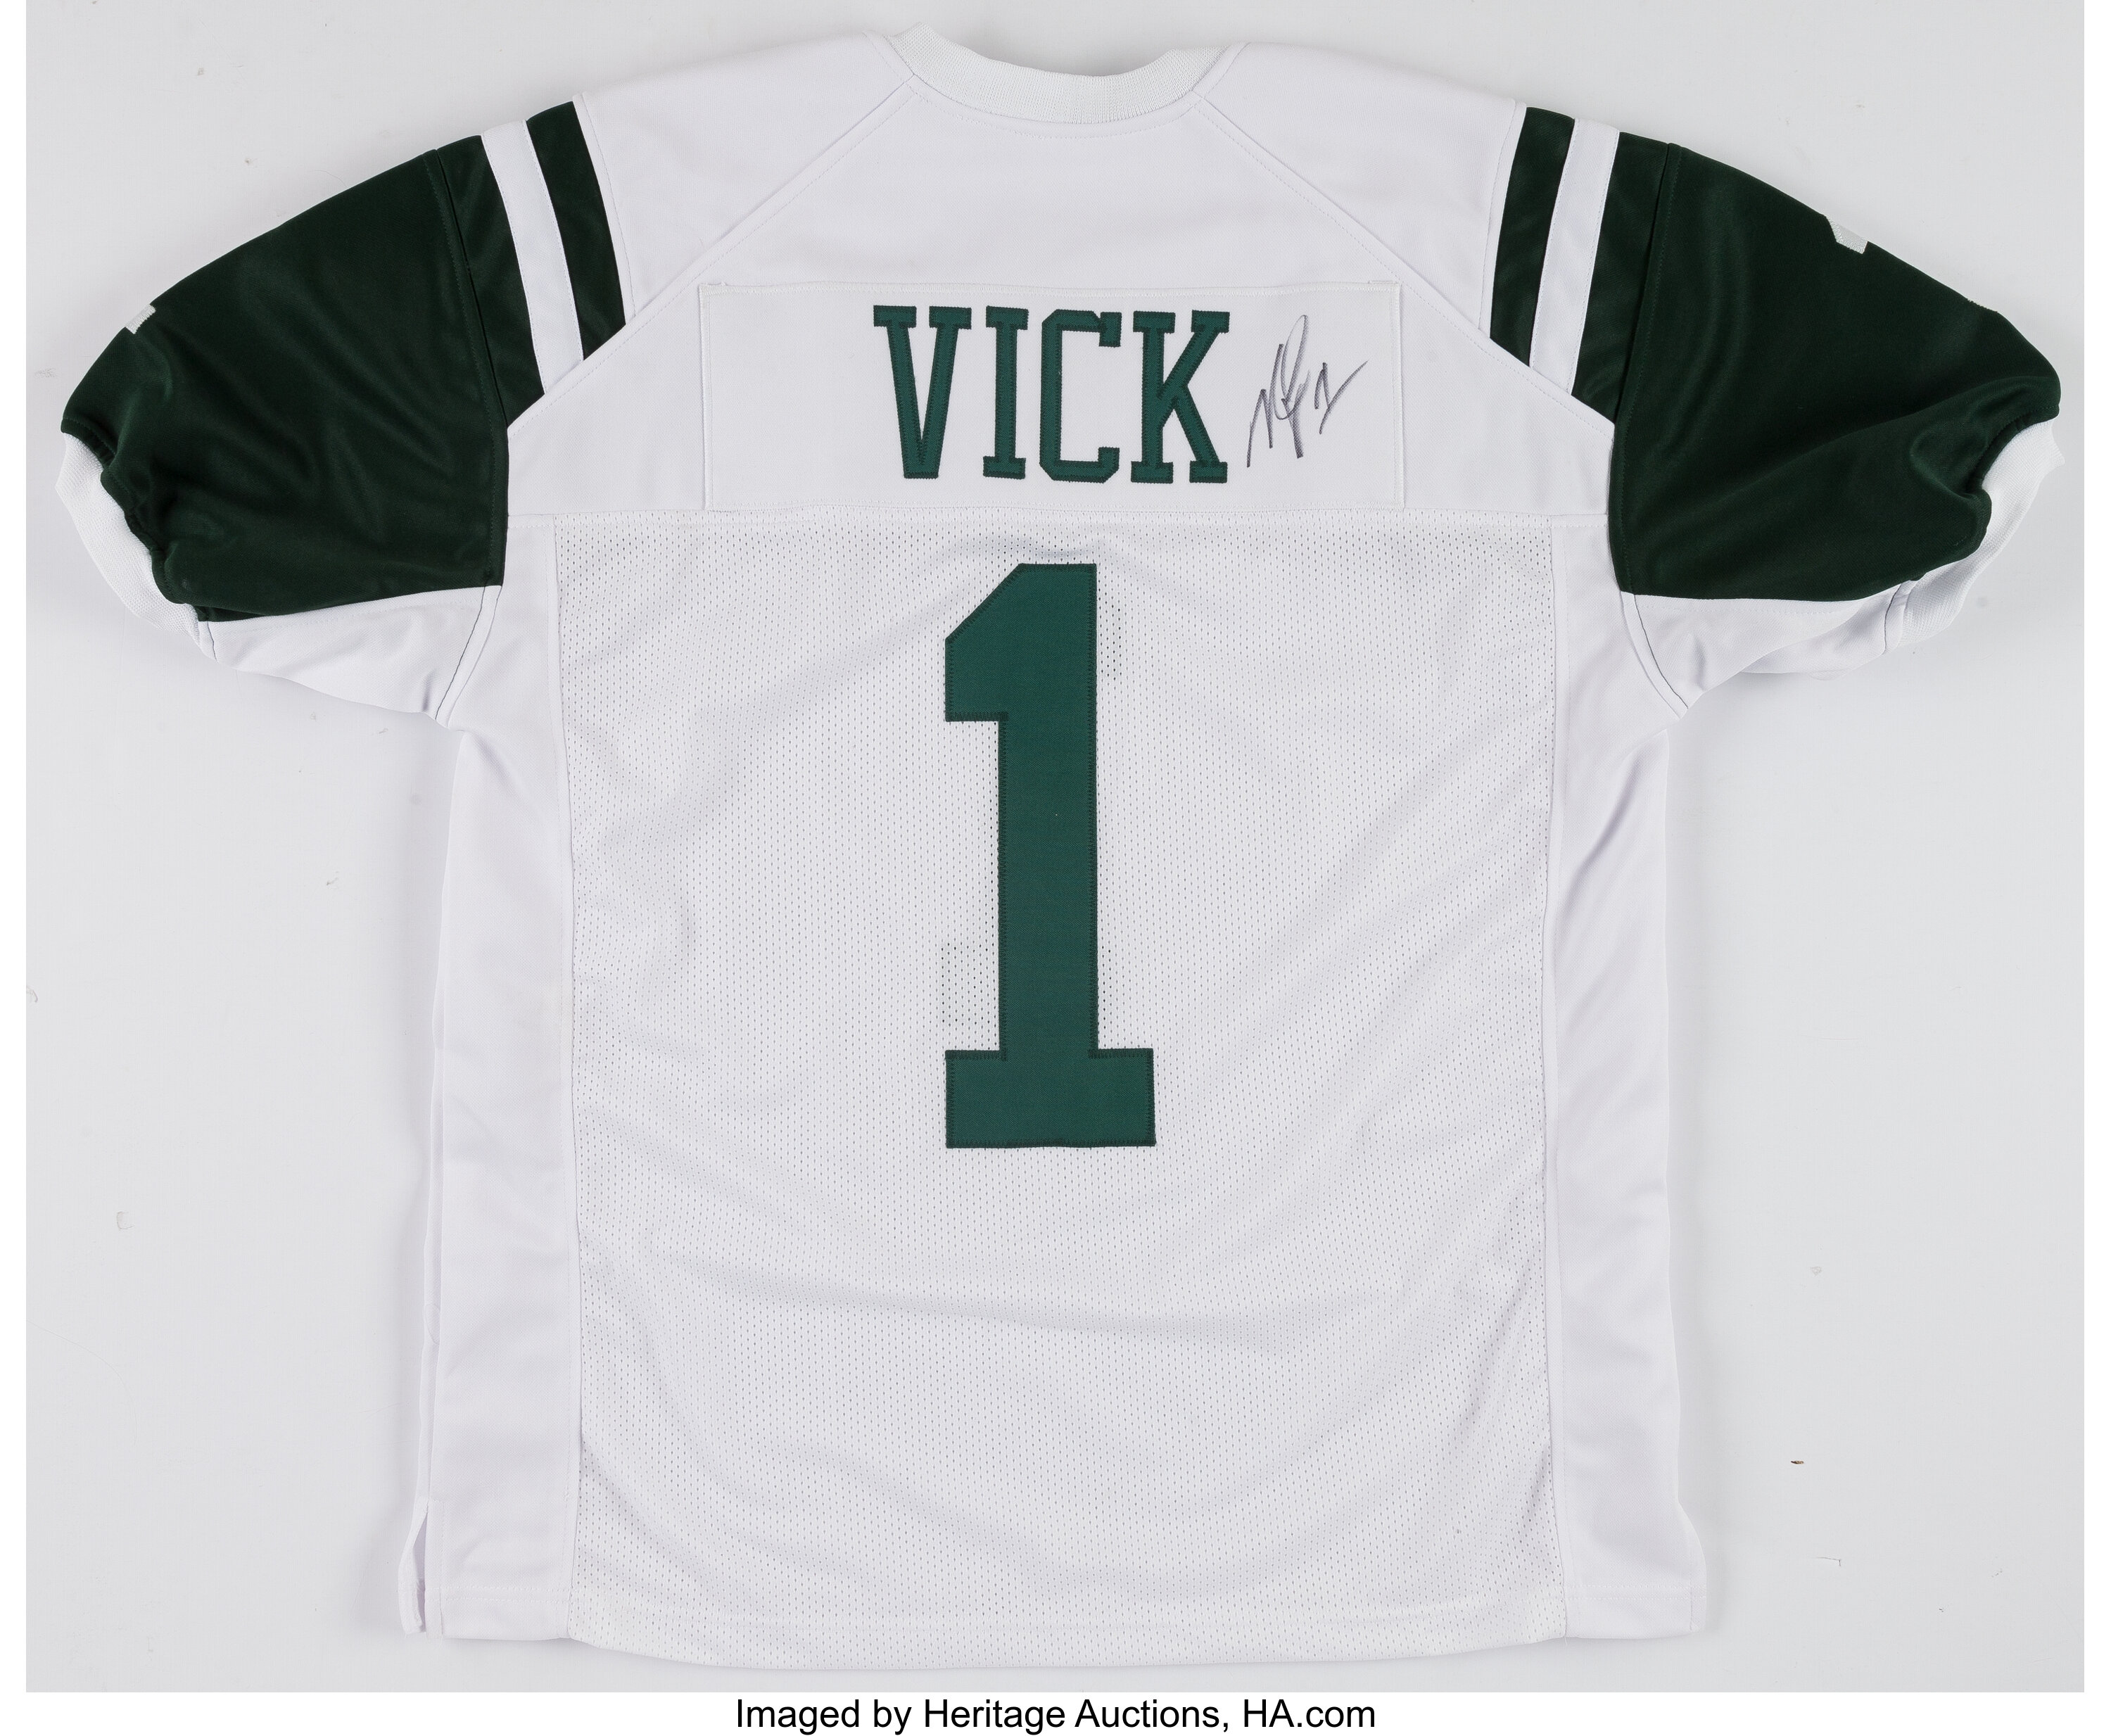 Michael Vick Signed New York Jets Jersey. Football Collectibles